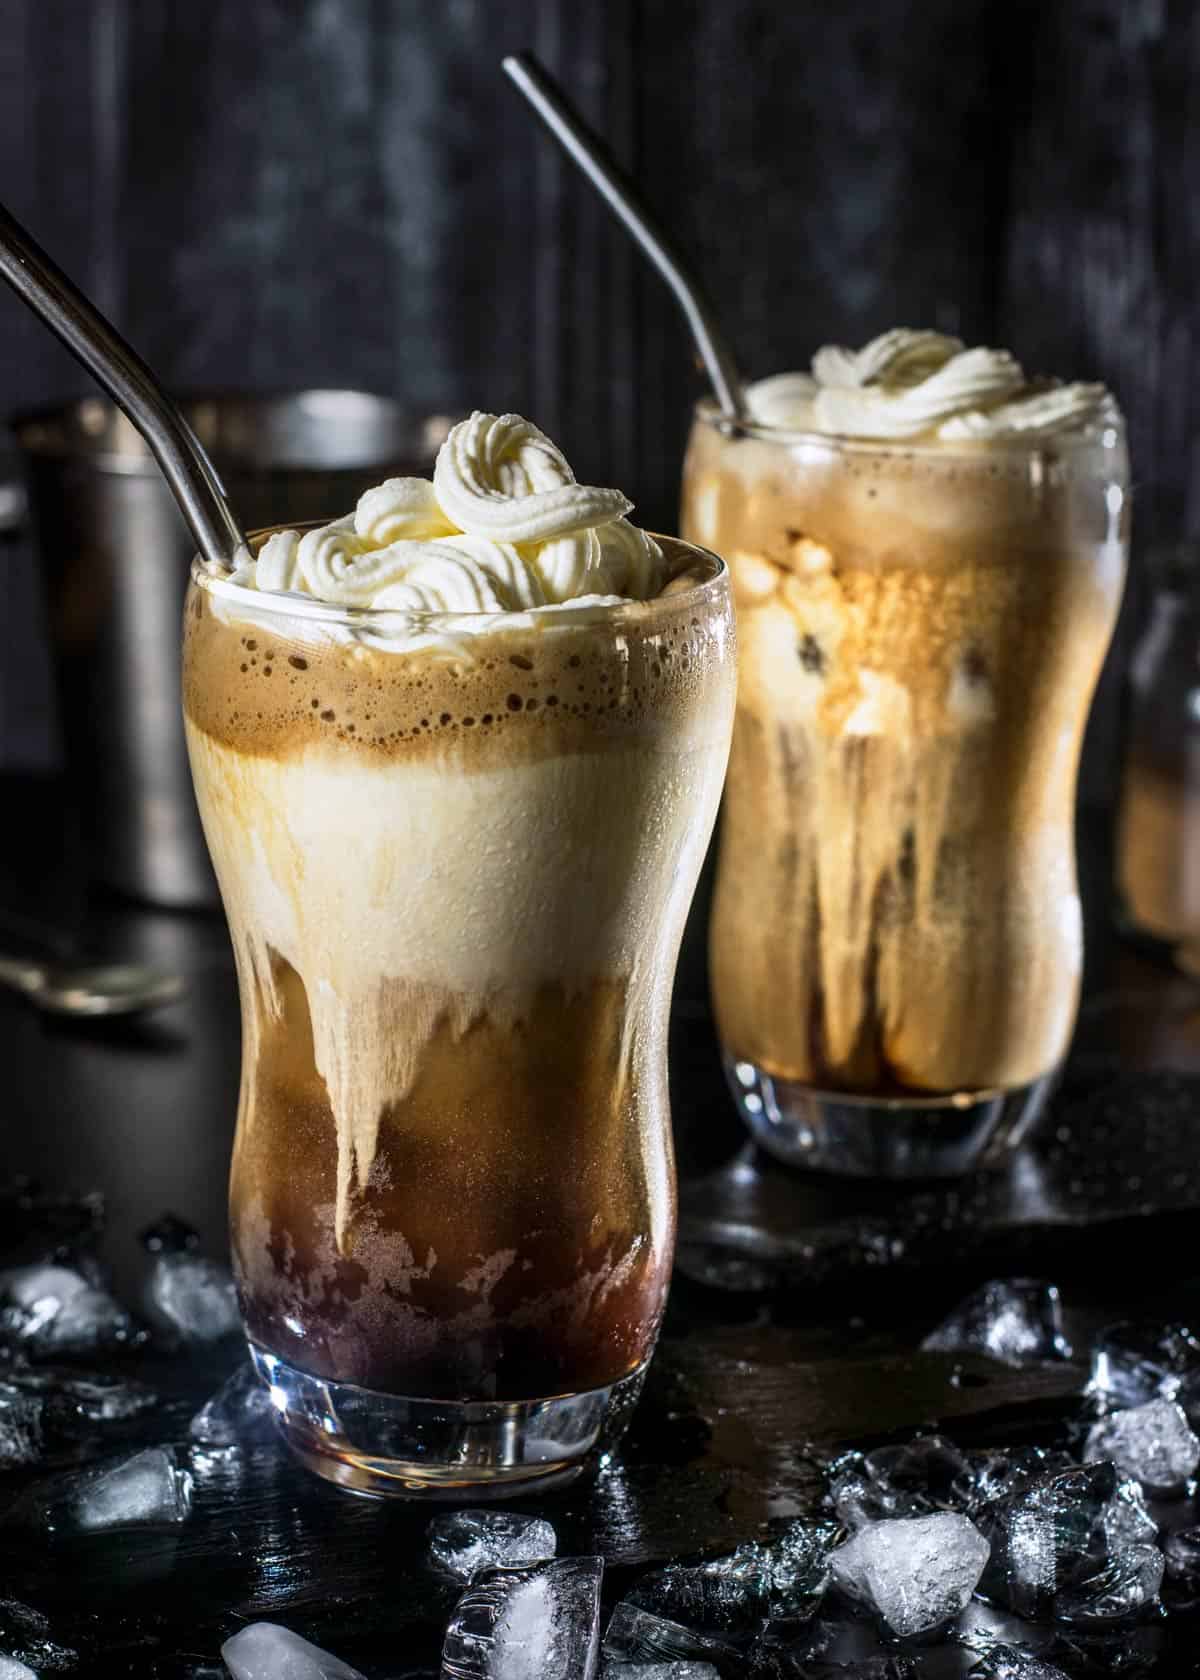 Greek-style iced coffee frappe served in two glasses with cream and whipped cream.